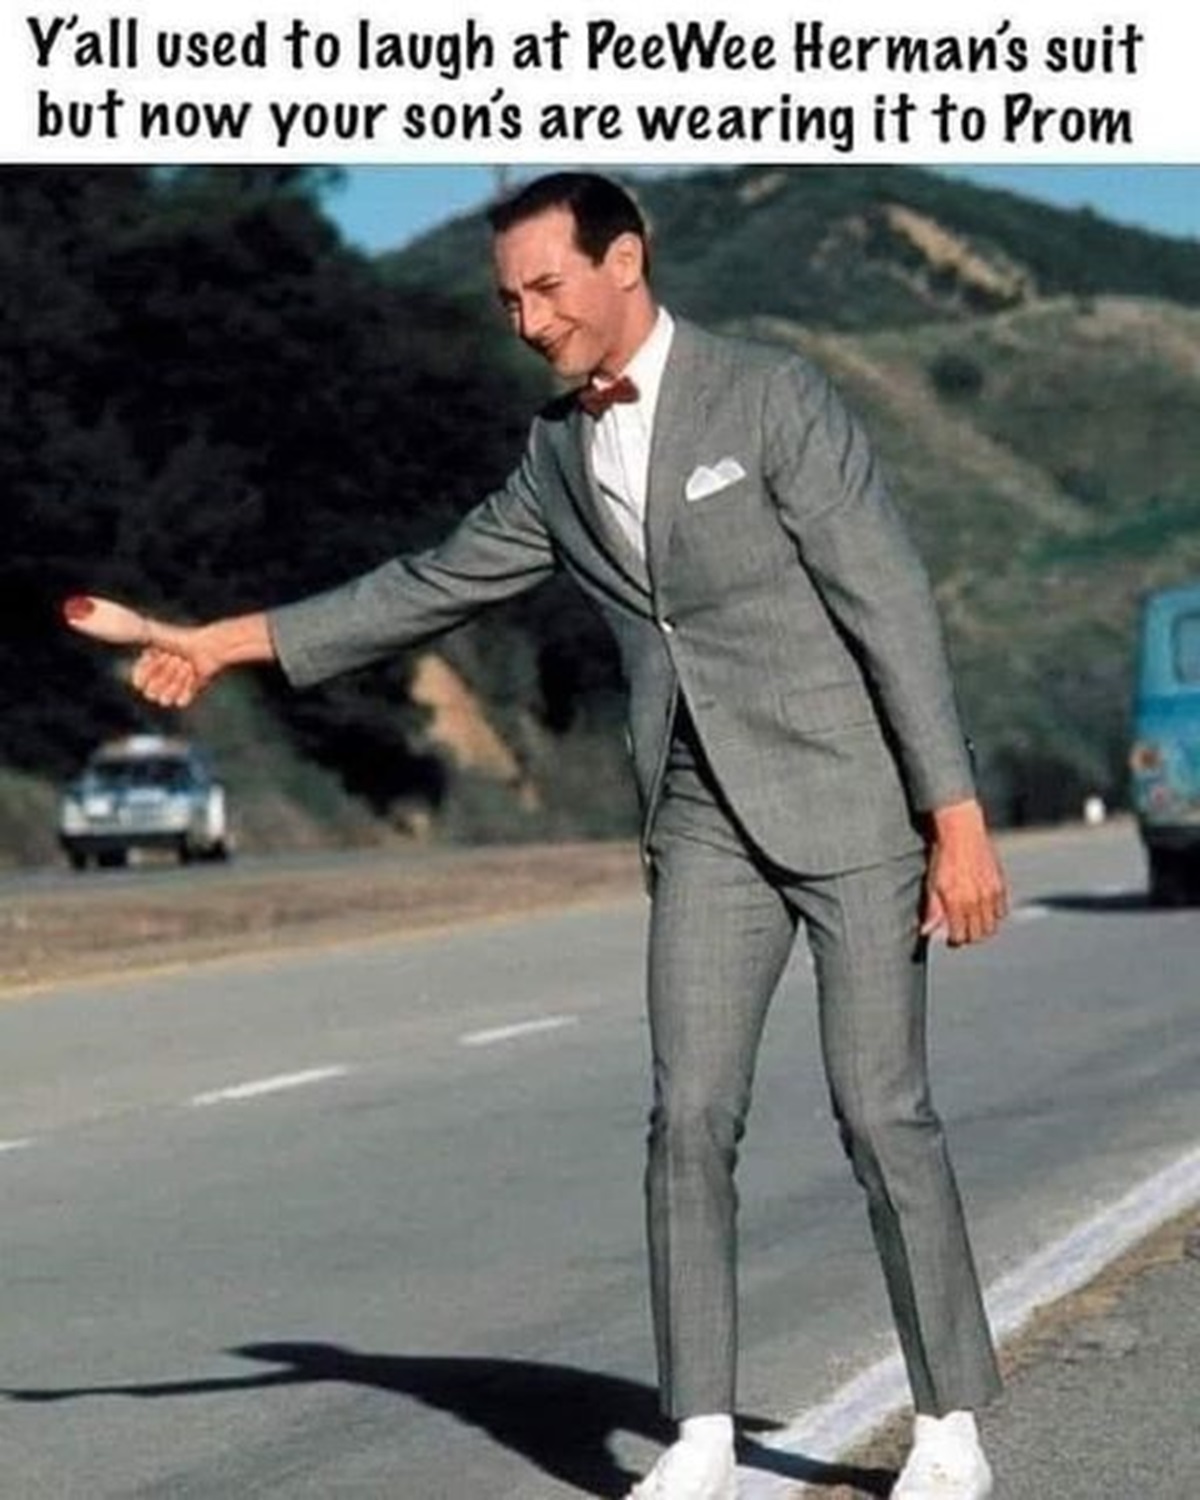 pee wee herman suit prom meme - Y'all used to laugh at PeeWee Herman's suit but now your son's are wearing it to Prom